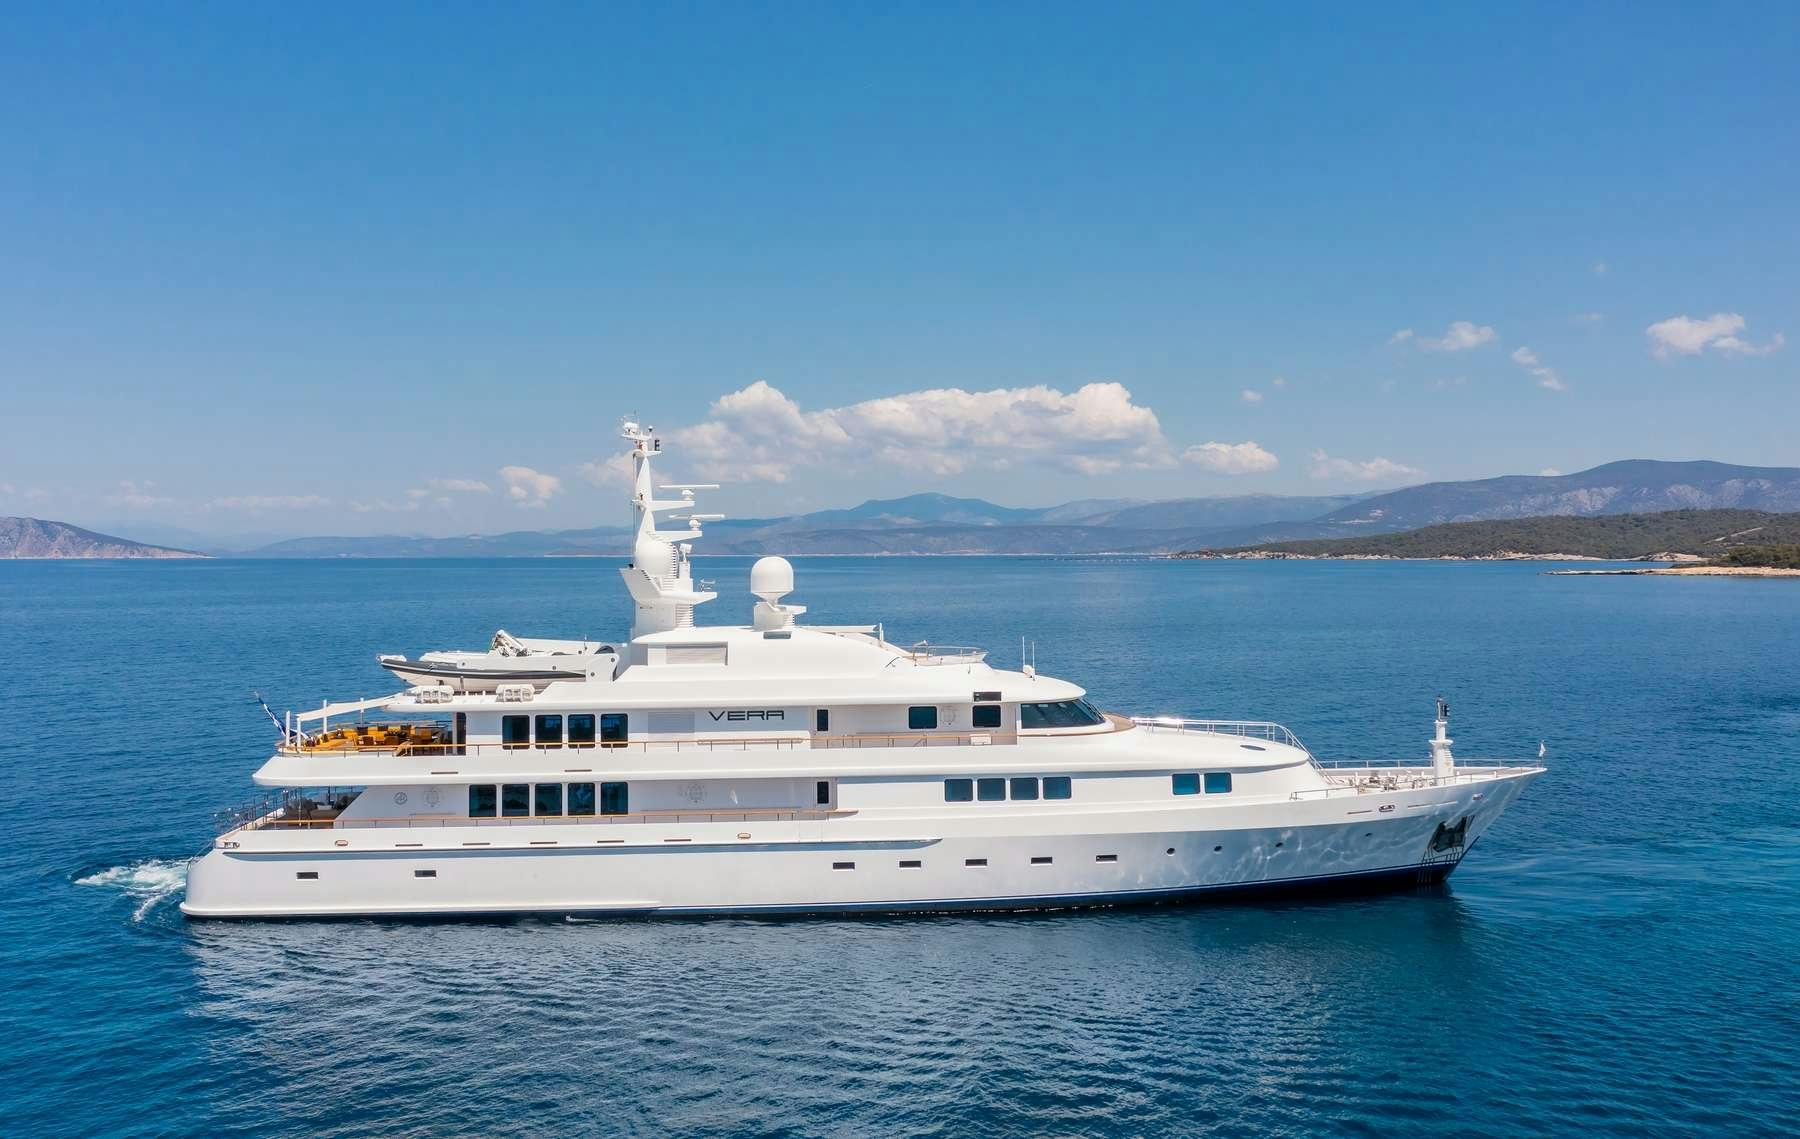 vera - Yacht Charter Italy & Boat hire in East Mediterranean 1